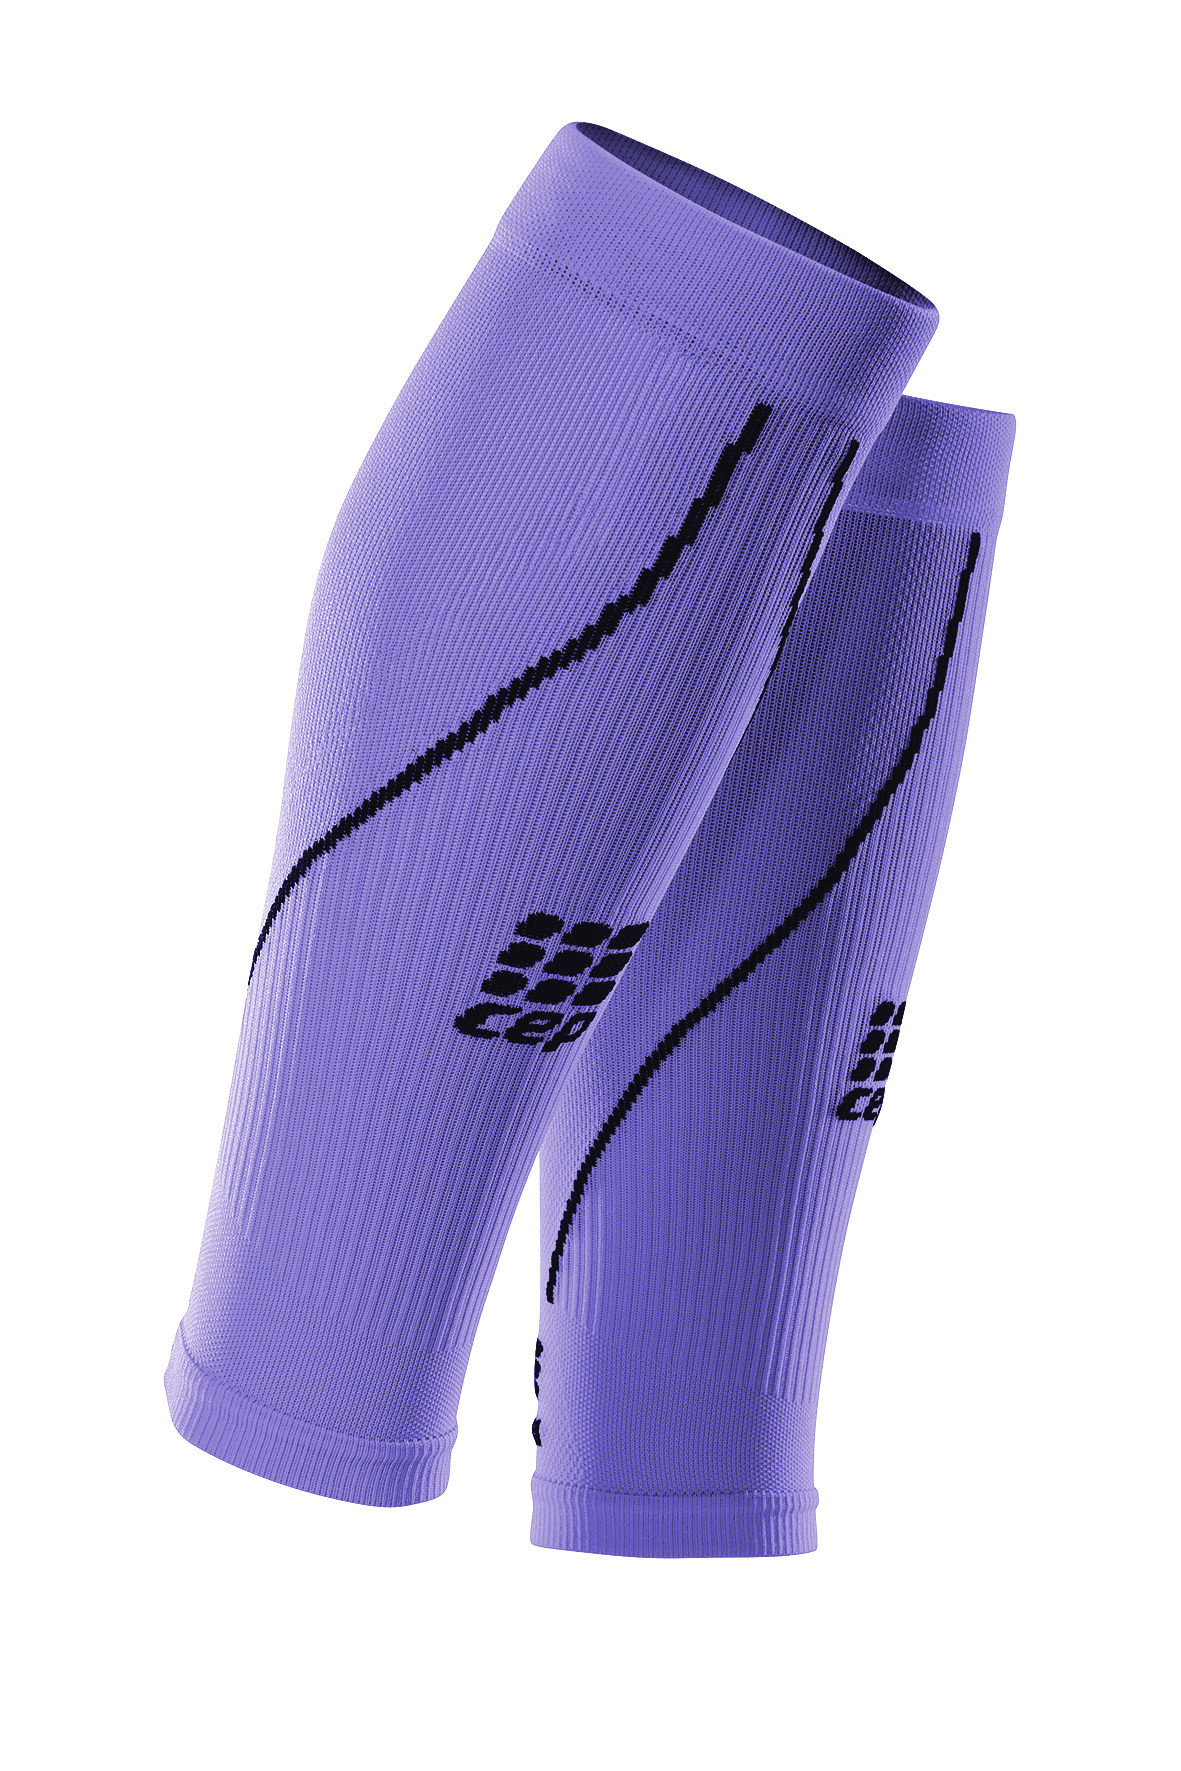 Compression Calf Sleeves - Pink  Lomo Watersport UK. Wetsuits, Dry Bags &  Outdoor Gear.